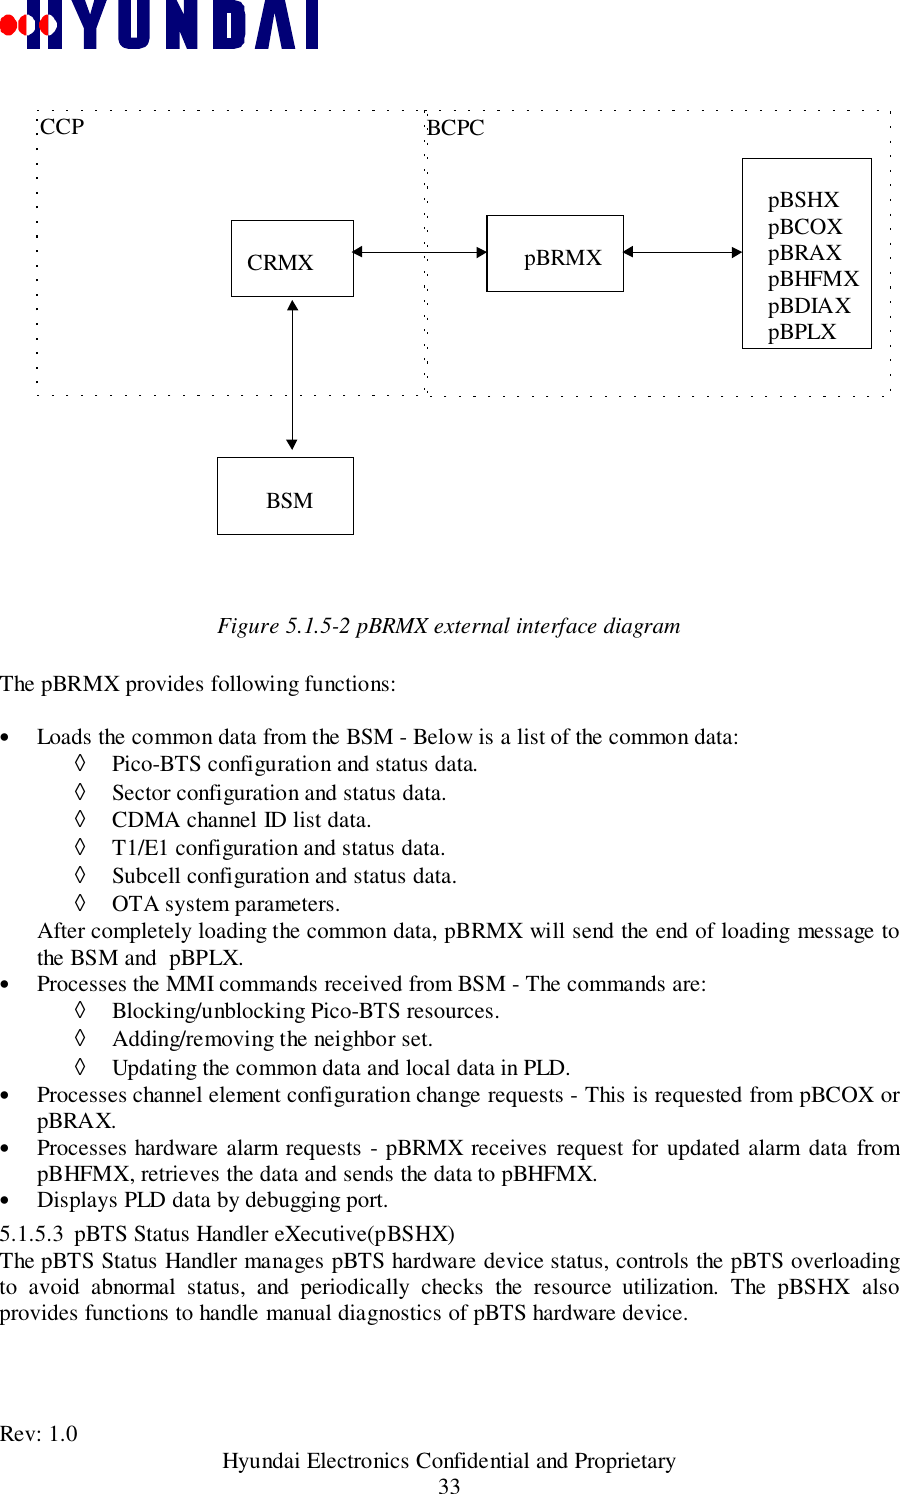 Rev: 1.0                                           Hyundai Electronics Confidential and Proprietary33                  Figure 5.1.5-2 pBRMX external interface diagramThe pBRMX provides following functions:• Loads the common data from the BSM - Below is a list of the common data:◊ Pico-BTS configuration and status data.◊ Sector configuration and status data.◊ CDMA channel ID list data.◊ T1/E1 configuration and status data.◊ Subcell configuration and status data.◊ OTA system parameters. After completely loading the common data, pBRMX will send the end of loading message tothe BSM and  pBPLX.• Processes the MMI commands received from BSM - The commands are:◊ Blocking/unblocking Pico-BTS resources.◊ Adding/removing the neighbor set.◊ Updating the common data and local data in PLD.• Processes channel element configuration change requests - This is requested from pBCOX orpBRAX.• Processes hardware alarm requests - pBRMX receives request for updated alarm data frompBHFMX, retrieves the data and sends the data to pBHFMX.• Displays PLD data by debugging port.5.1.5.3 pBTS Status Handler eXecutive(pBSHX)The pBTS Status Handler manages pBTS hardware device status, controls the pBTS overloadingto avoid abnormal status, and periodically checks the resource utilization. The pBSHX alsoprovides functions to handle manual diagnostics of pBTS hardware device.      pBRMX  CRMX    pBSHX    pBCOX    pBRAX    pBHFMX    pBDIAX    pBPLXCCP BCPC        BSM